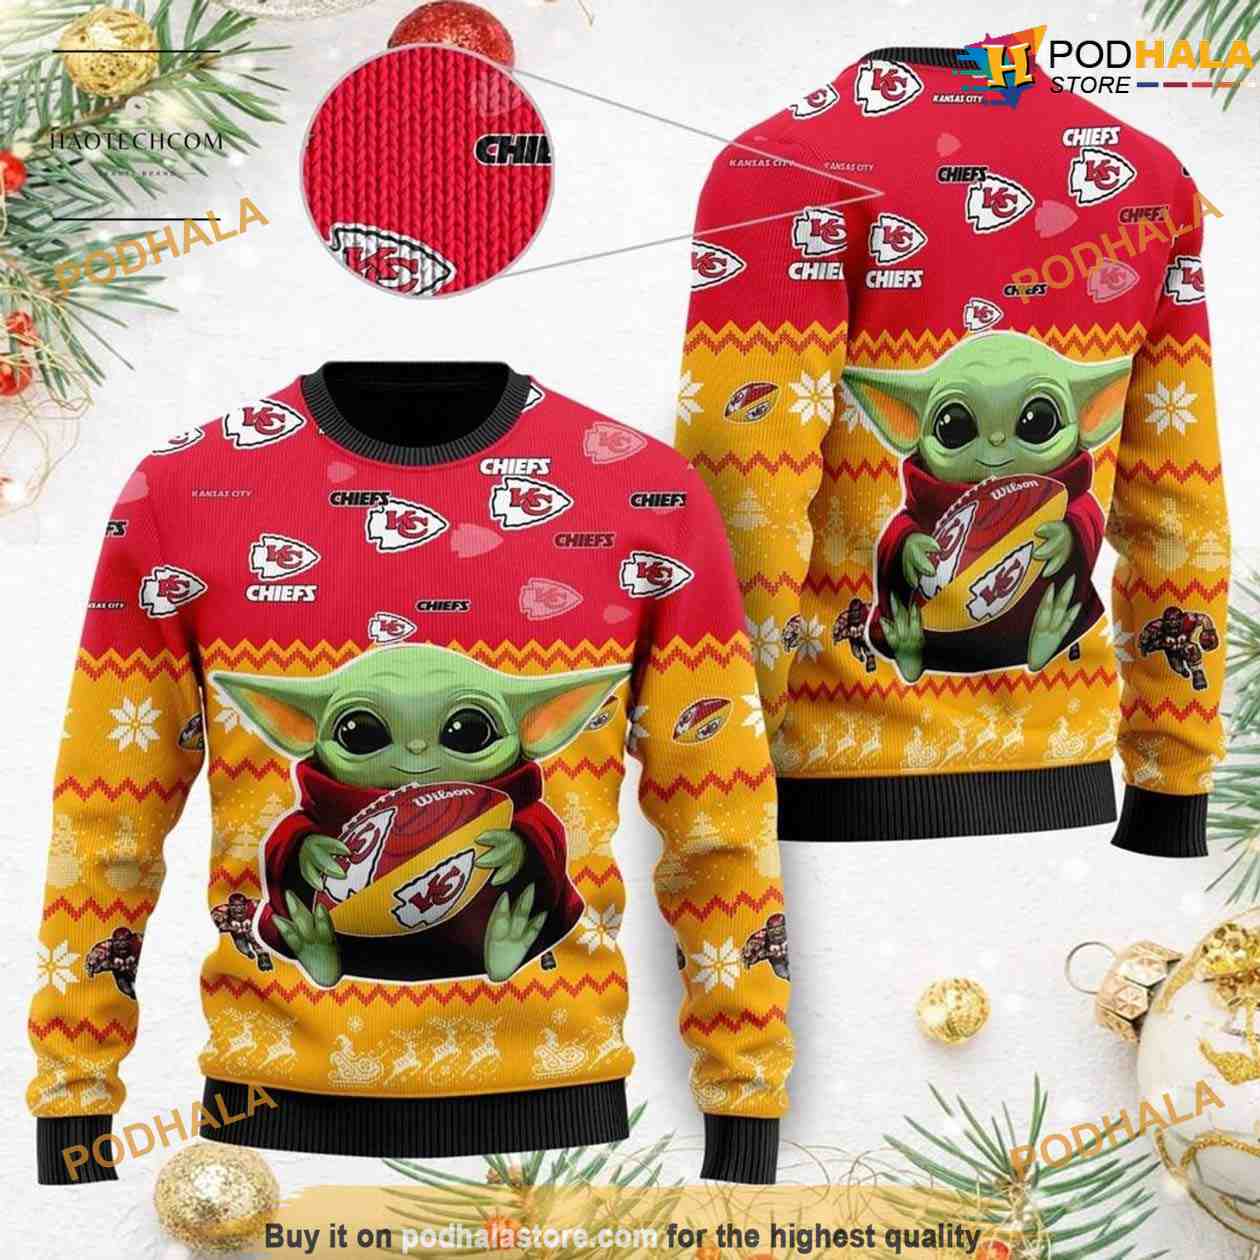 Boston Red Sox Cute Baby Yoda Star Wars 3D Ugly Christmas Sweater